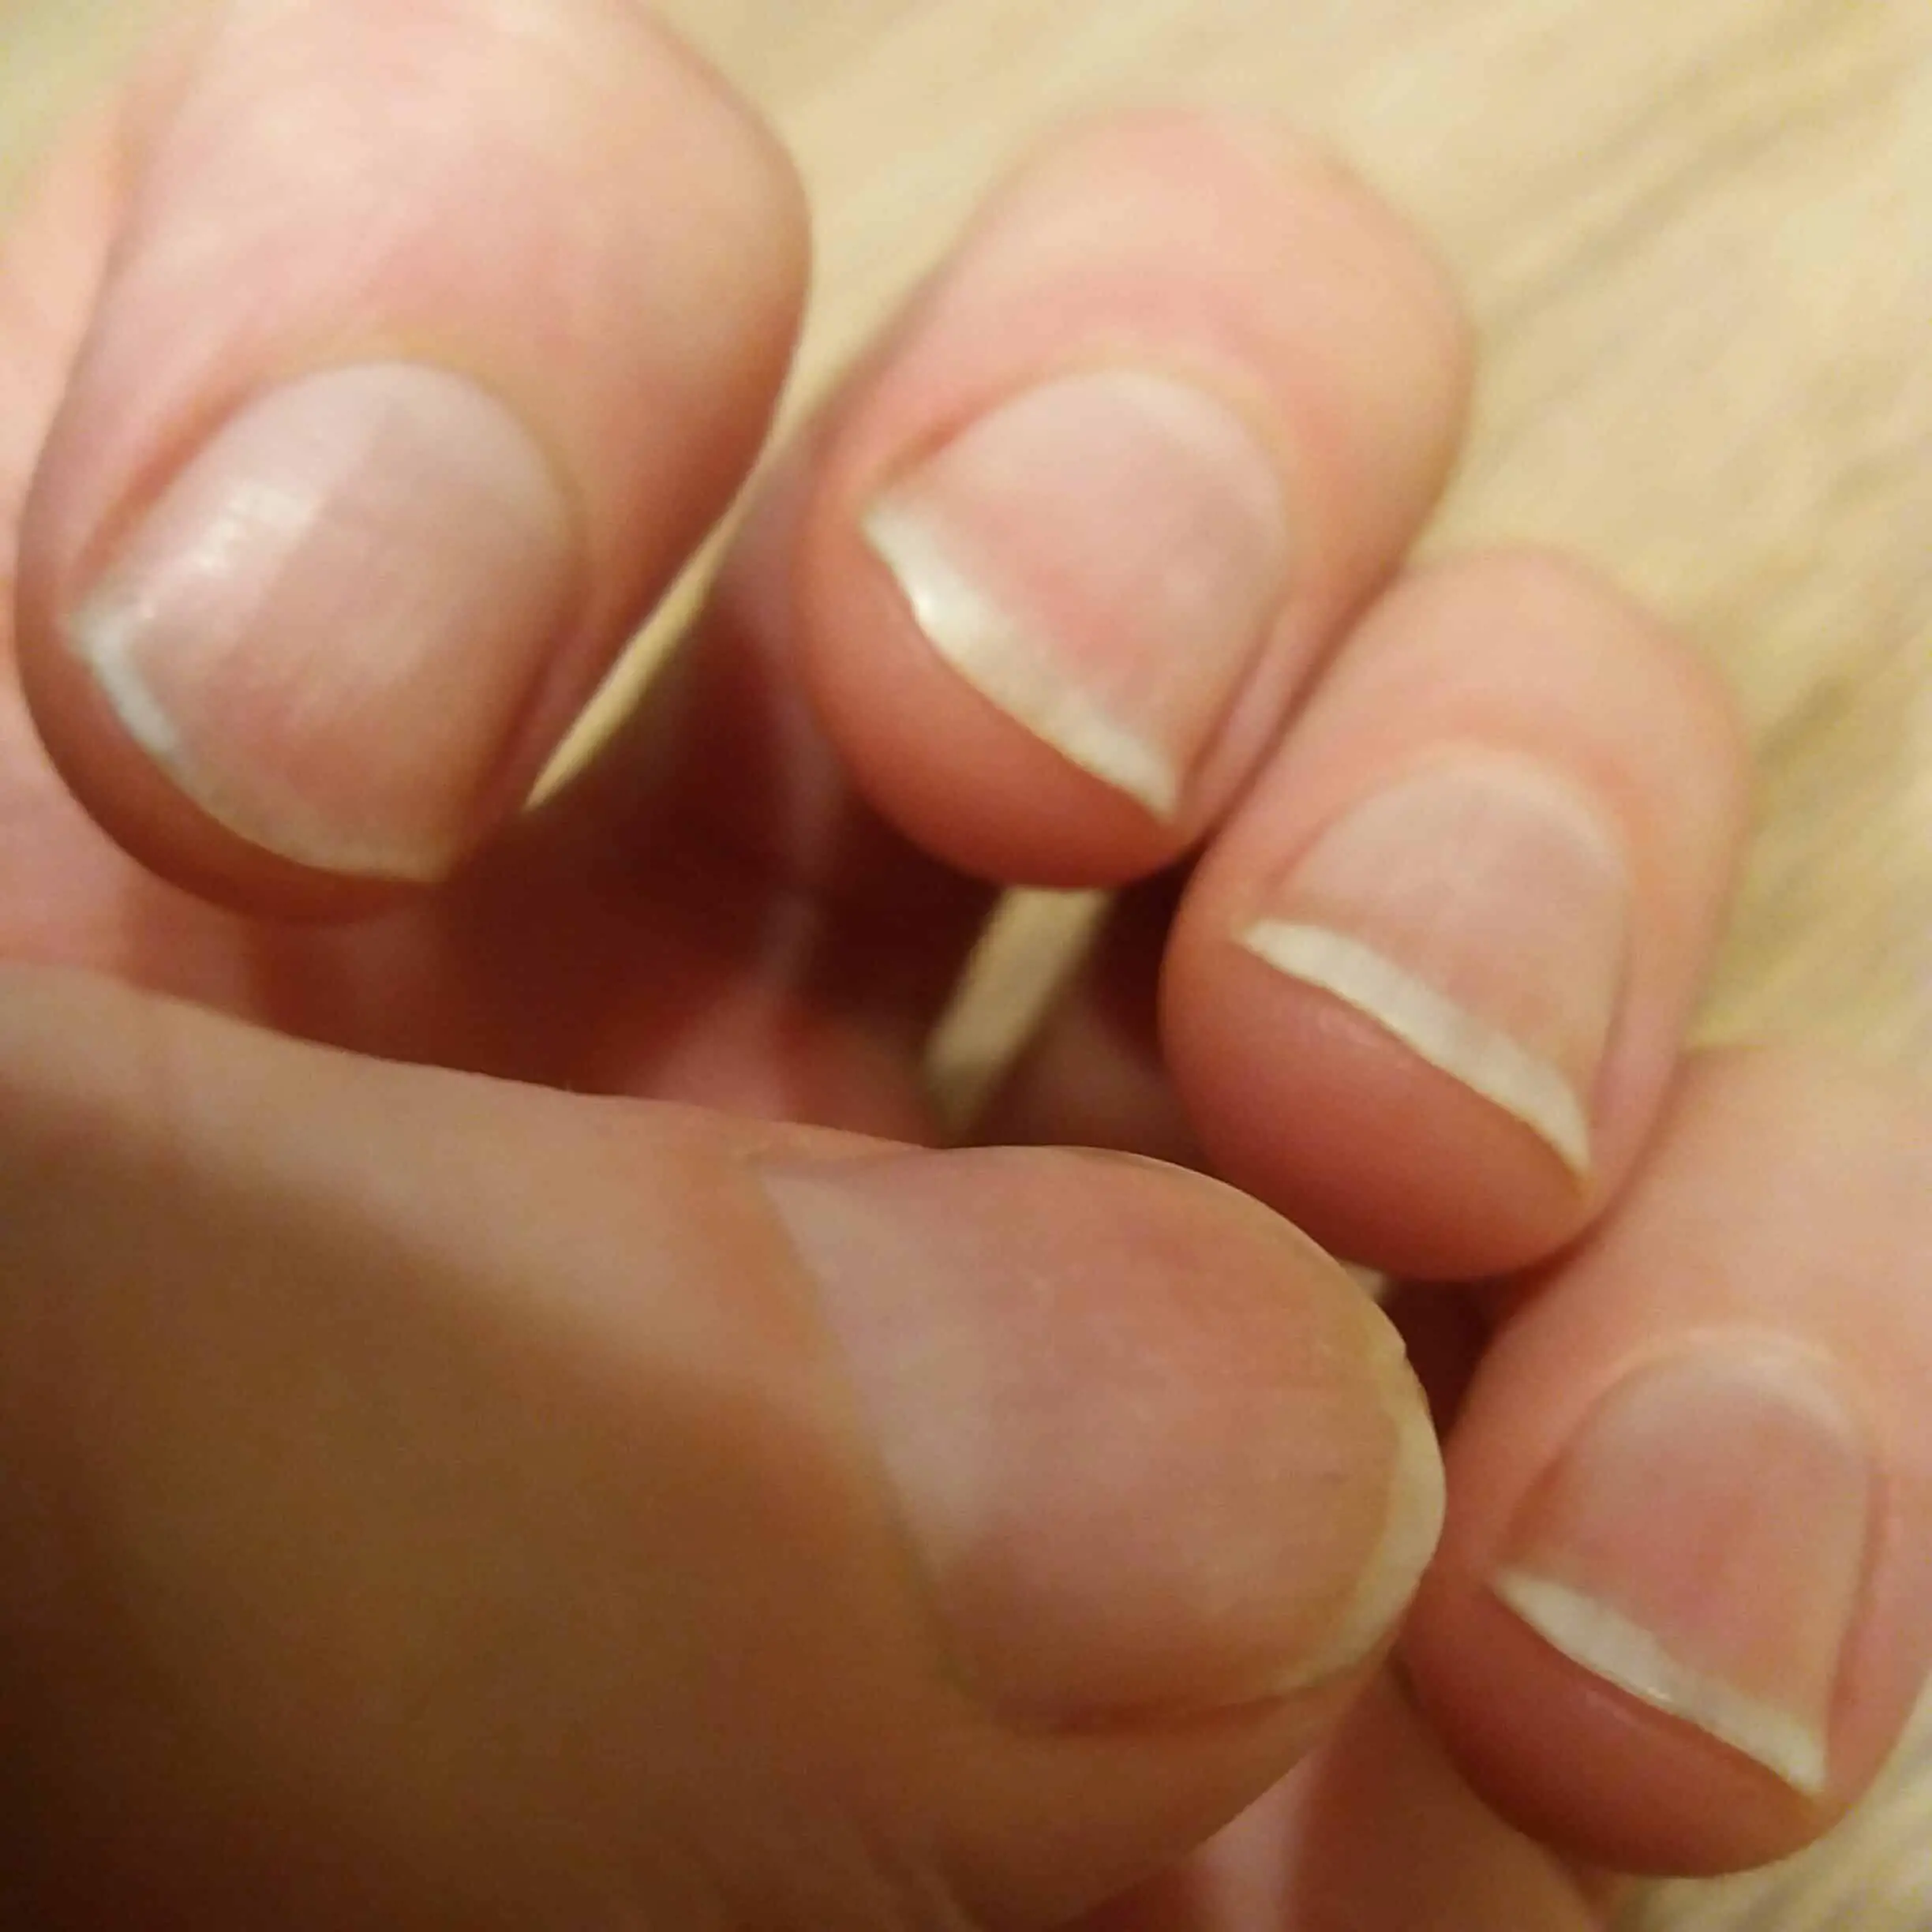 Nail Biting Relapse: How To Break The Nail Biting Habit